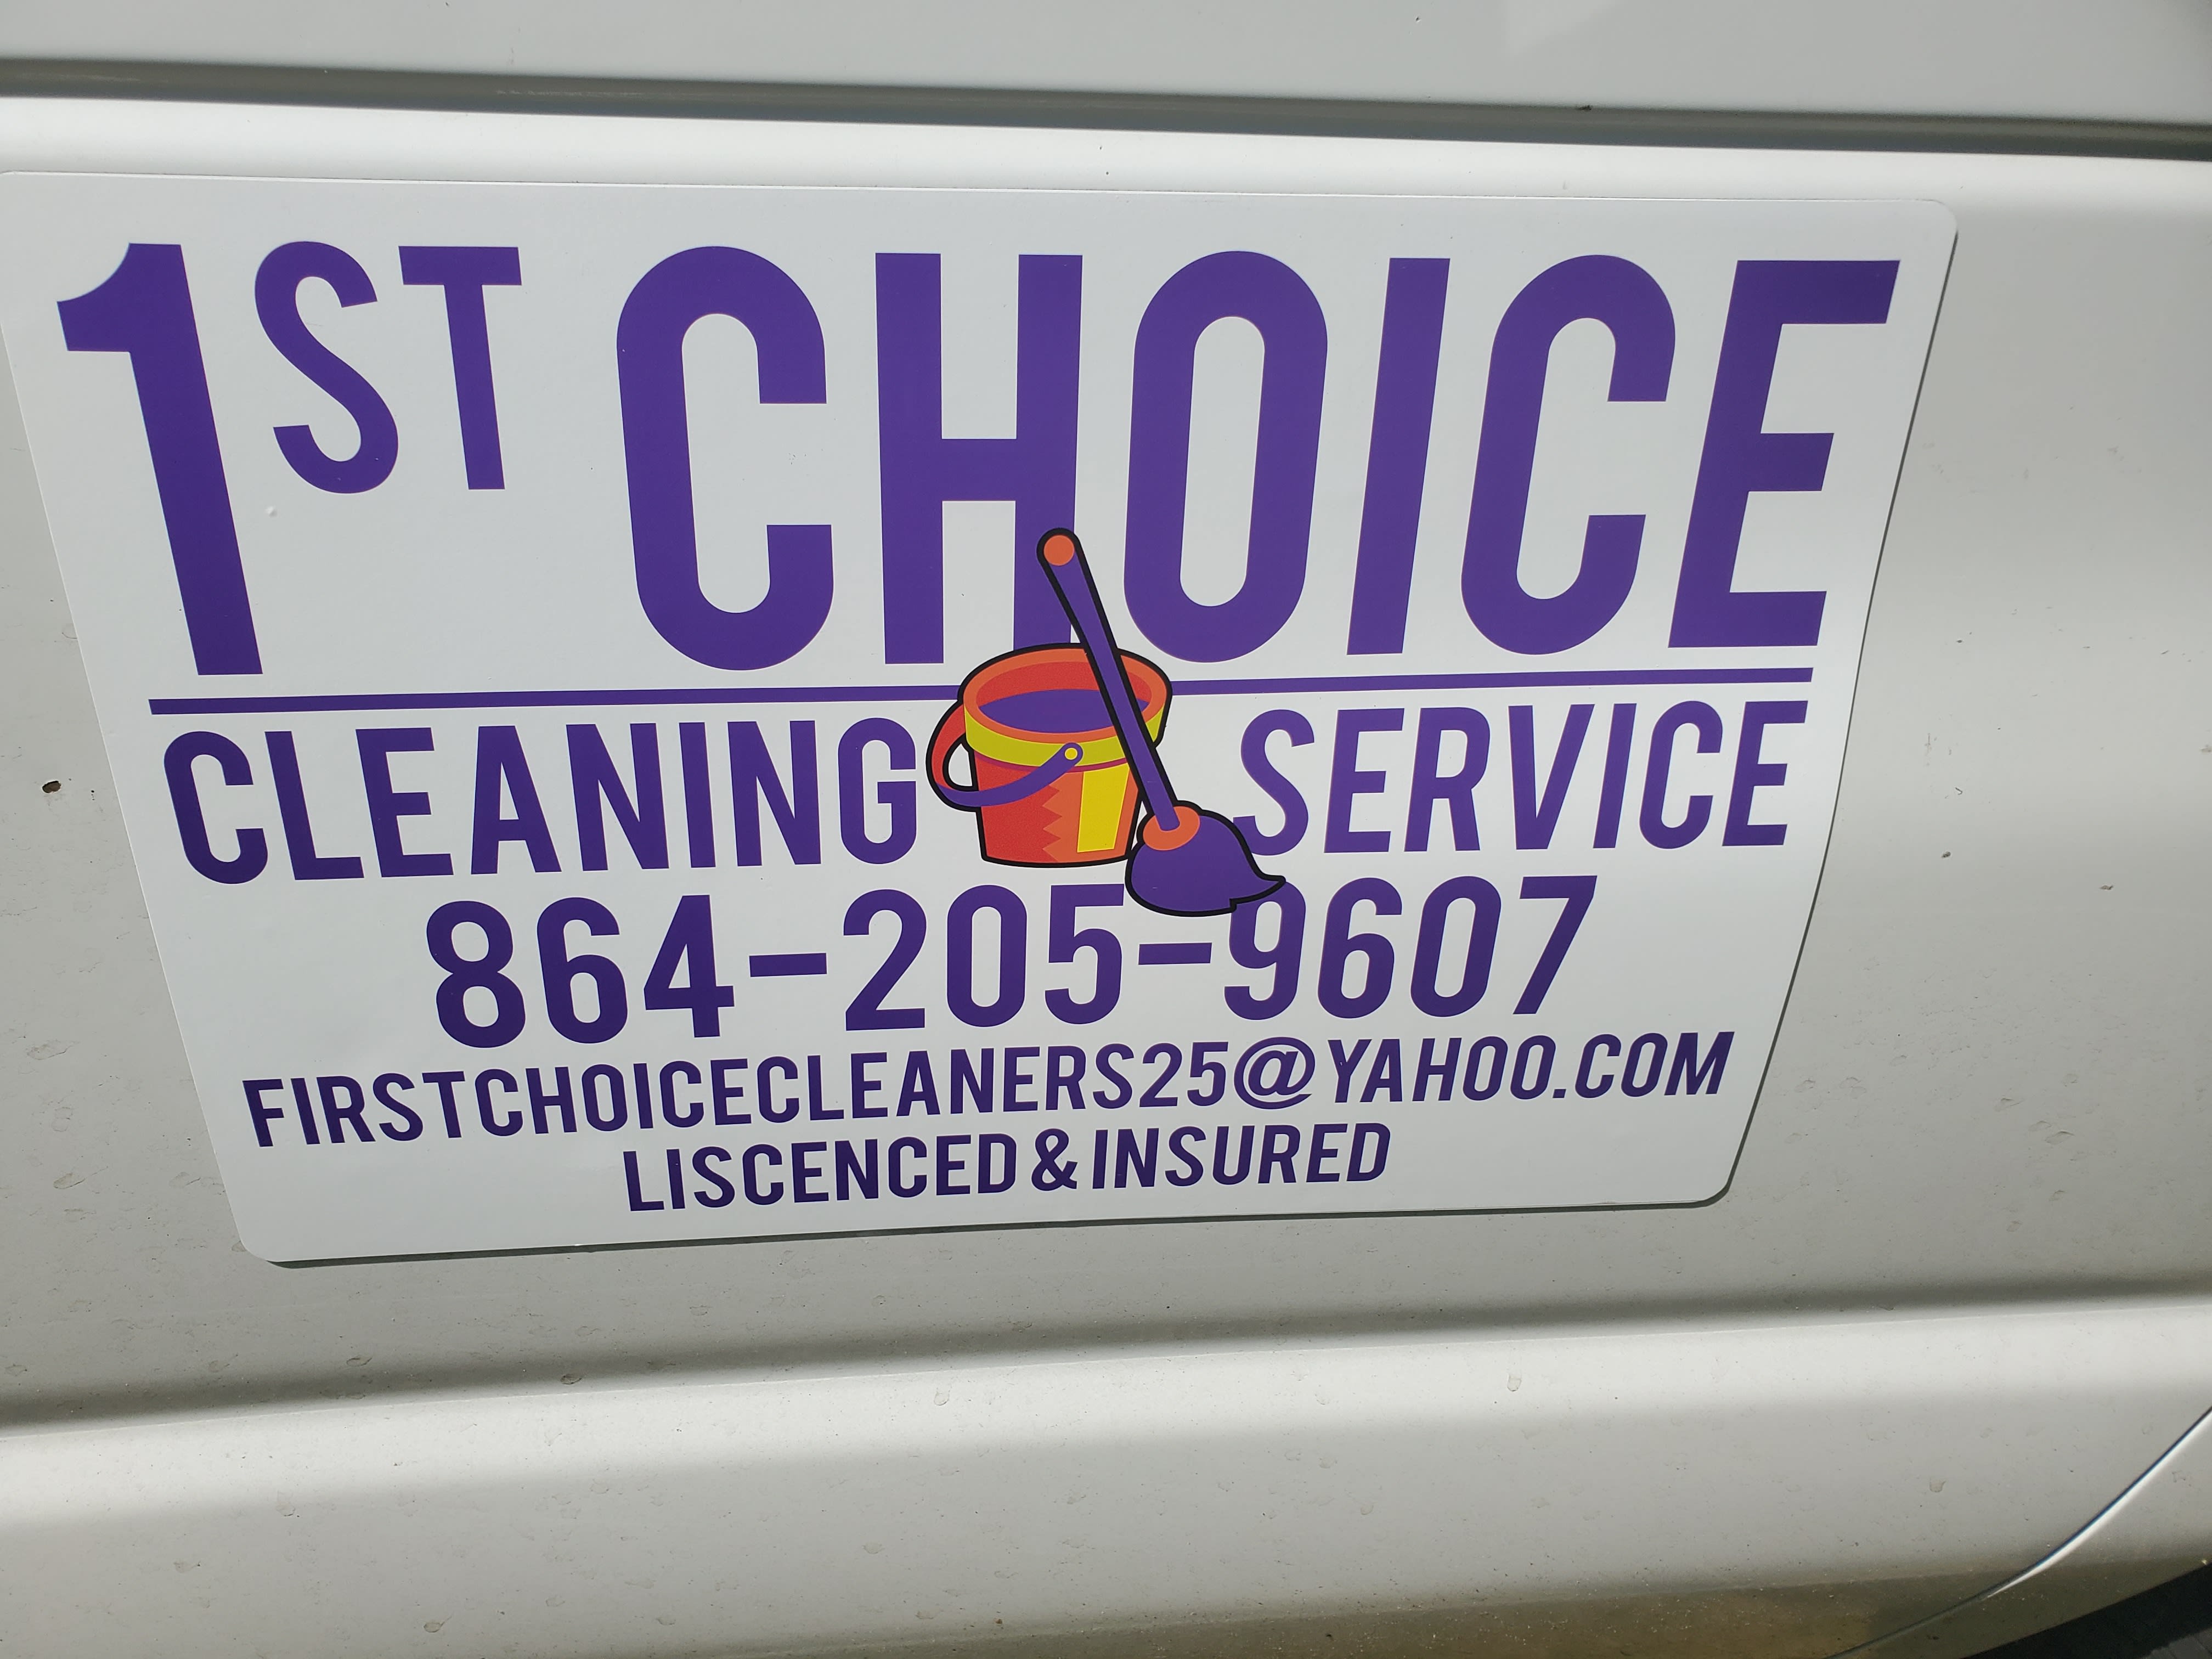 1St Choice  Cleaning  Service